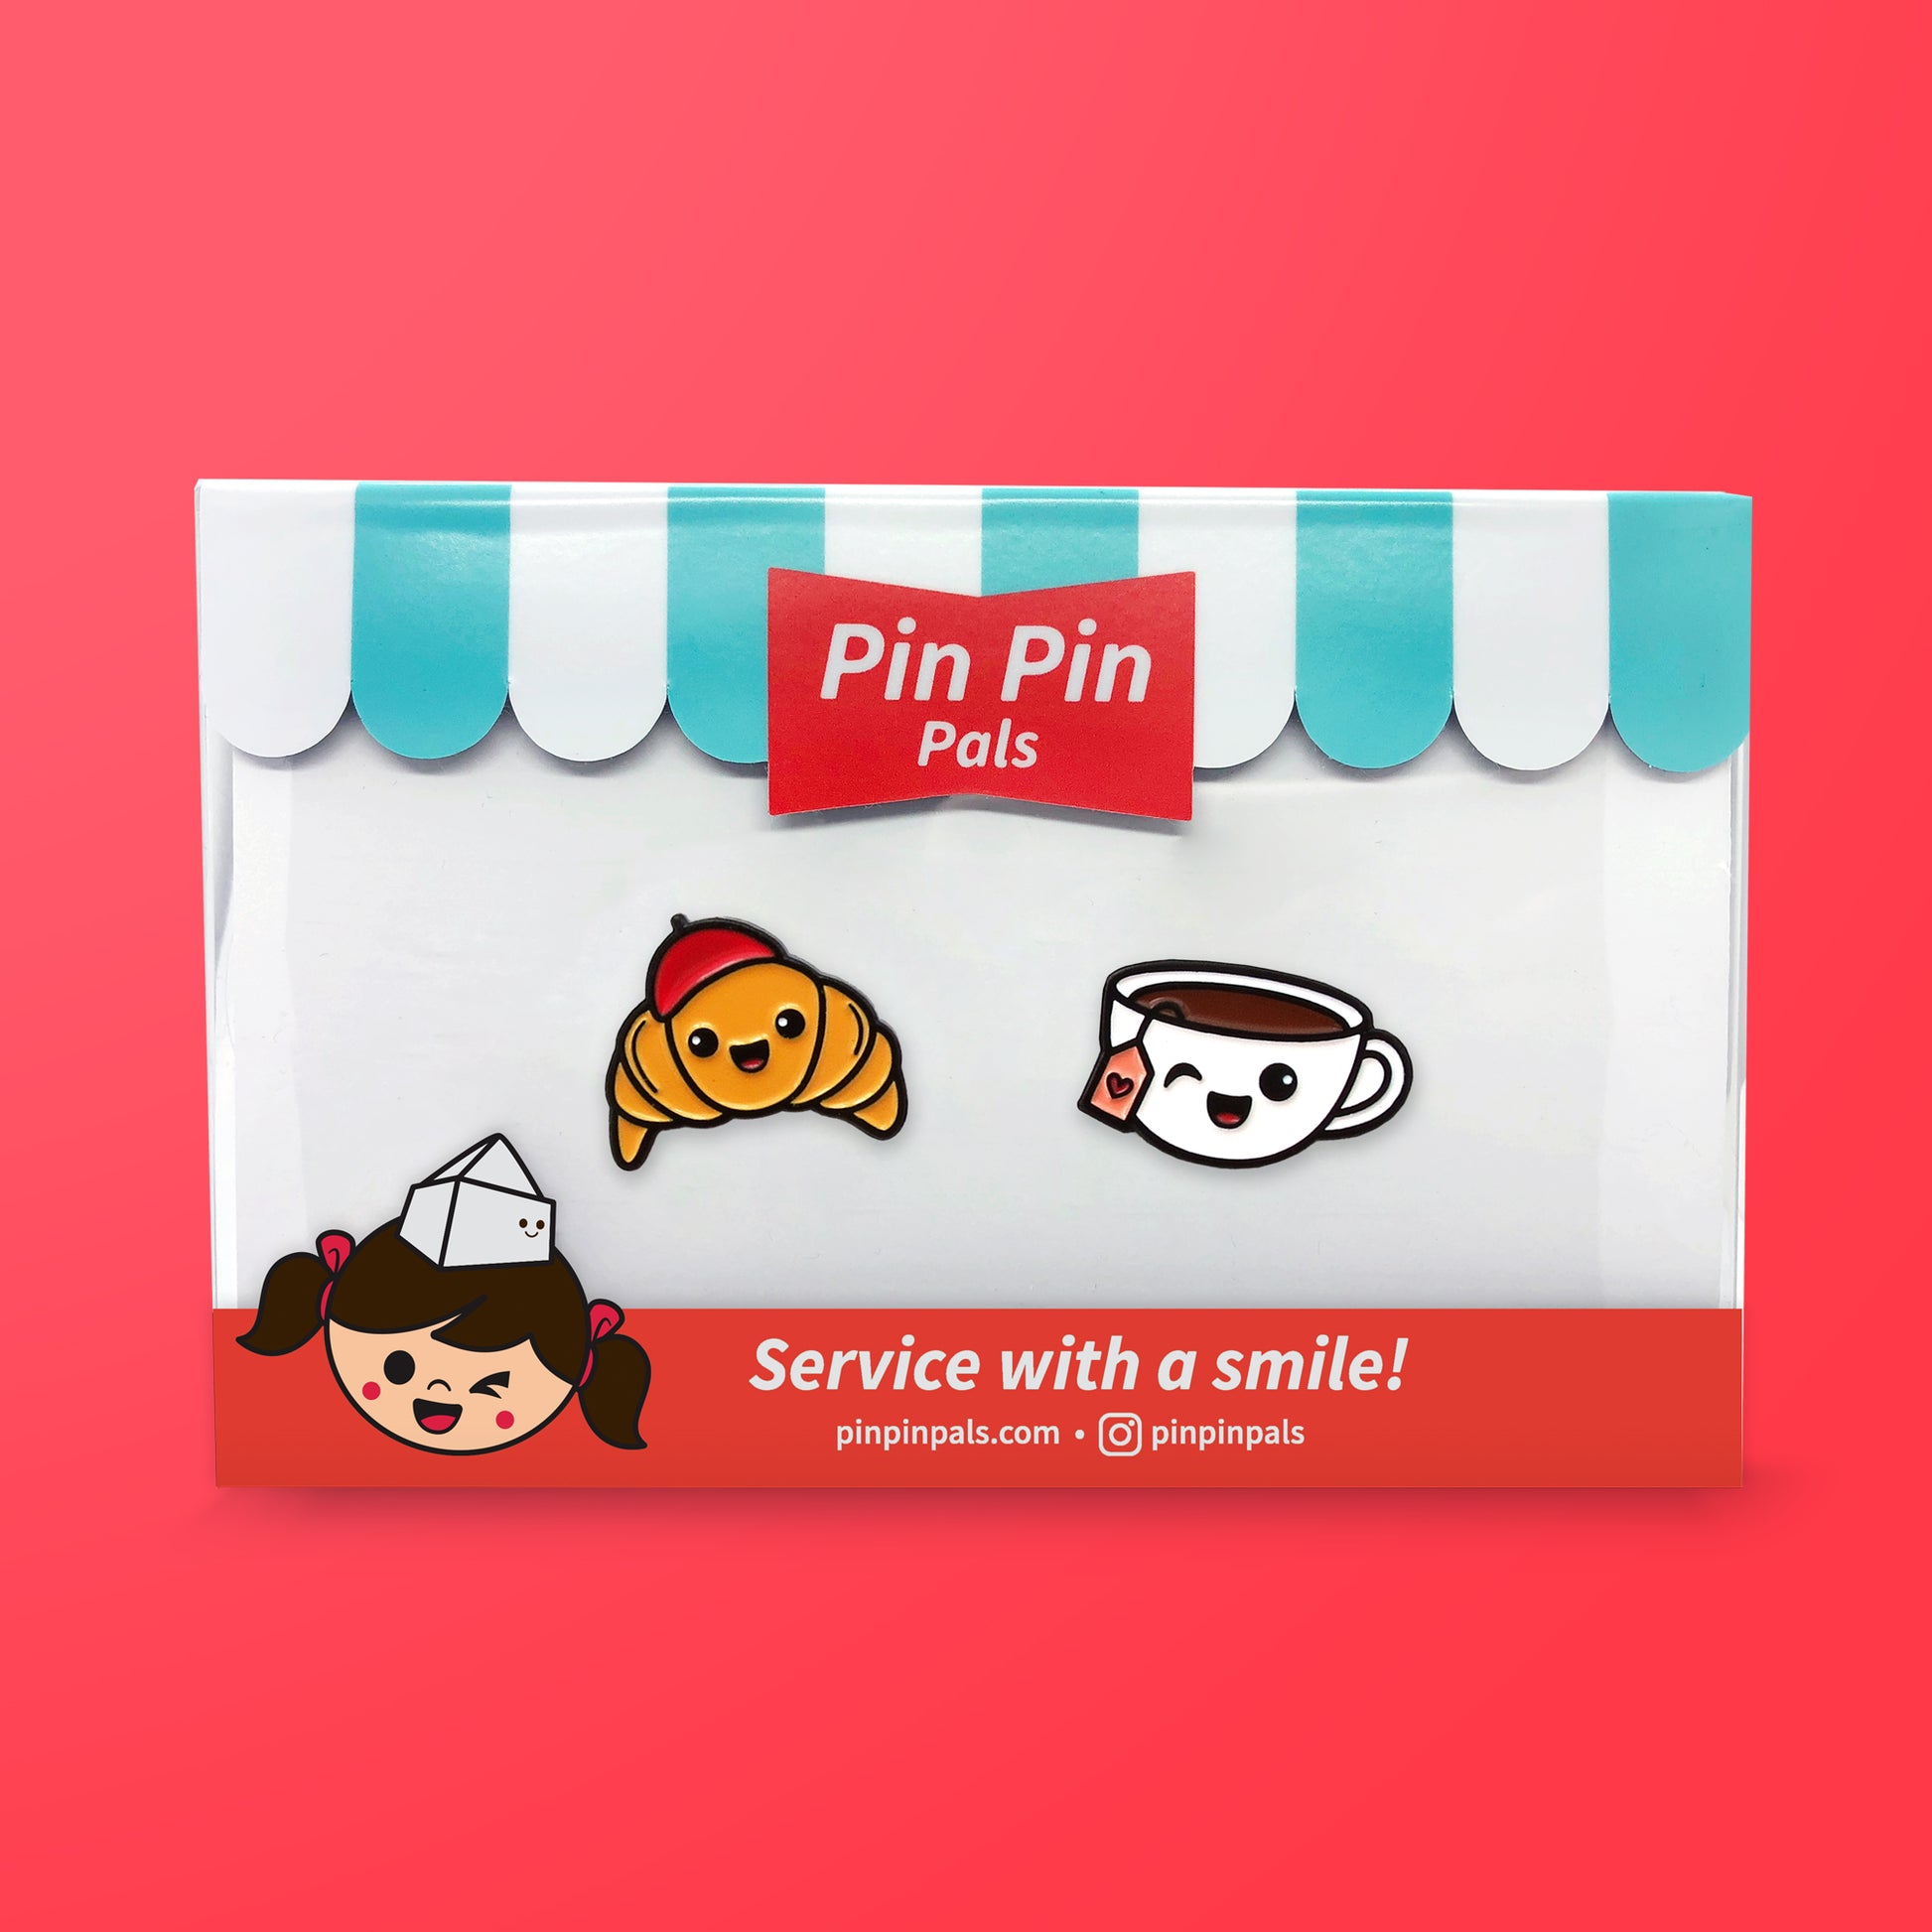 Pin Pin Pals Croissant and Tea enamel pin set in packaging box on red background